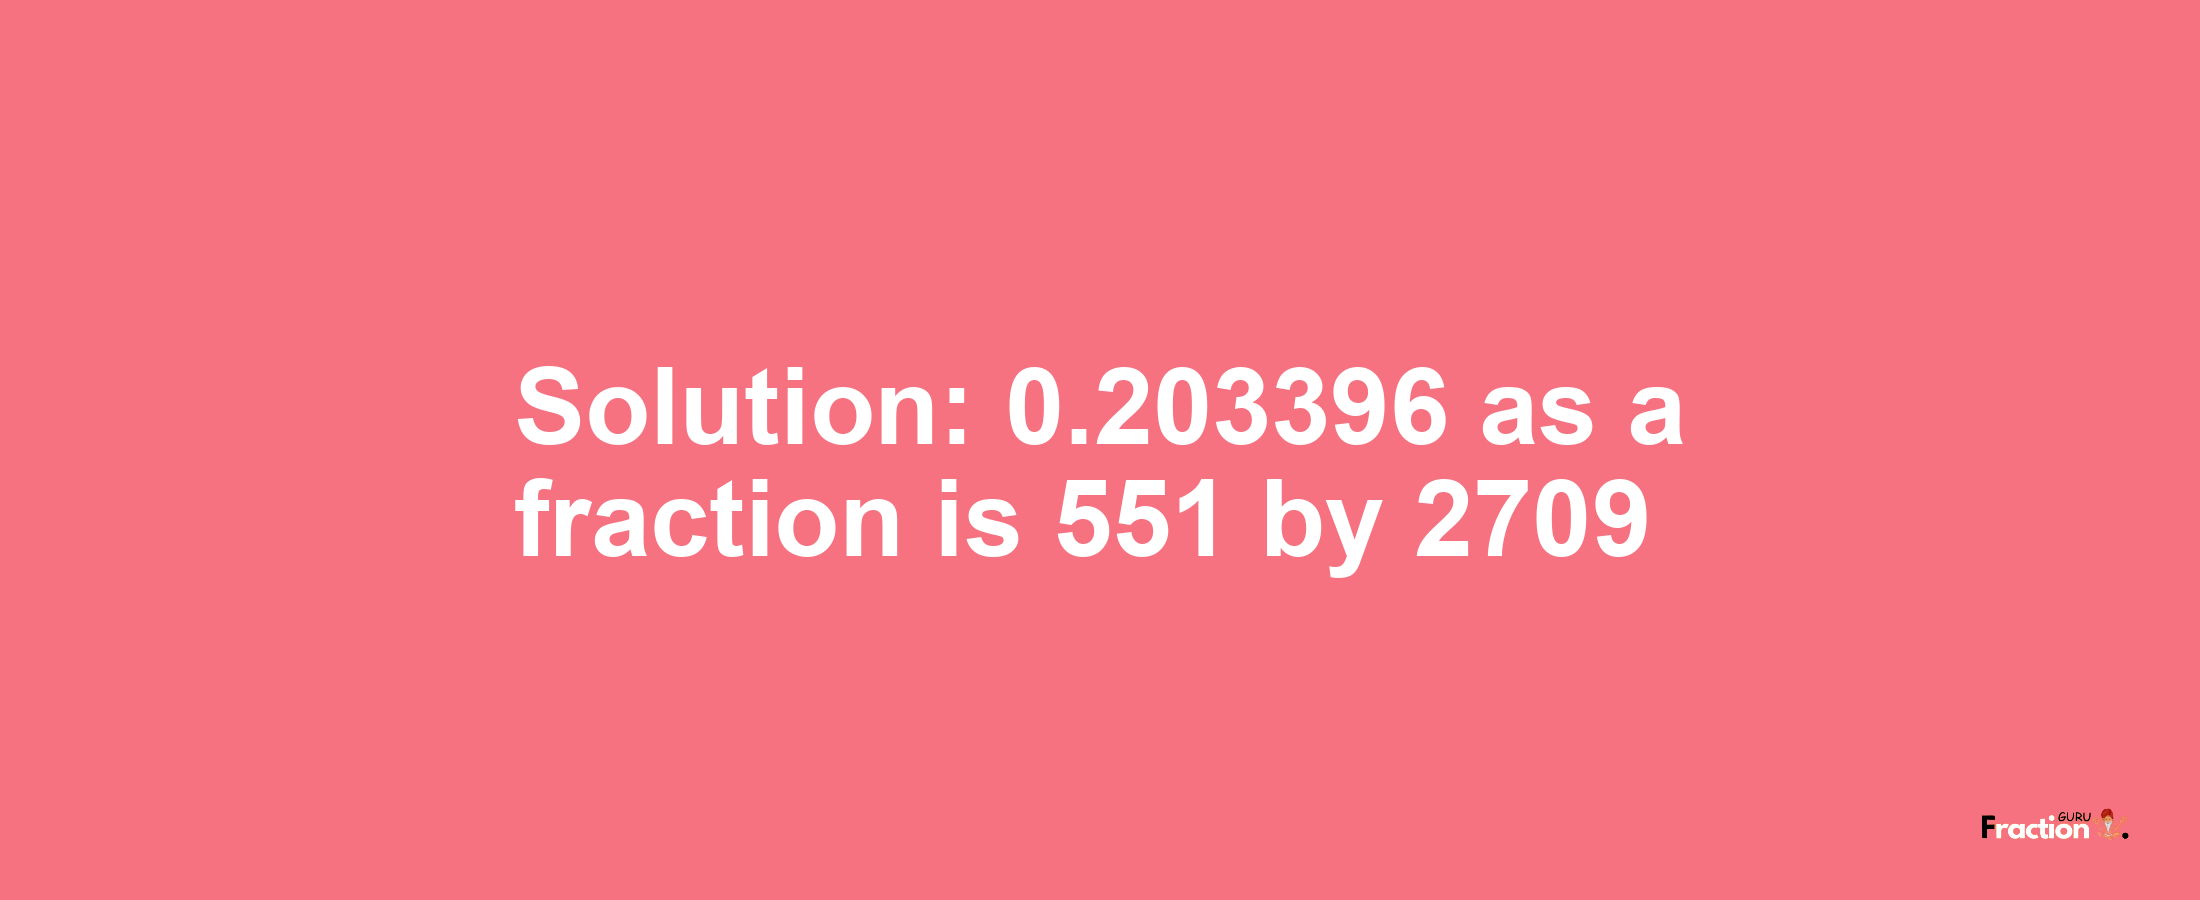 Solution:0.203396 as a fraction is 551/2709